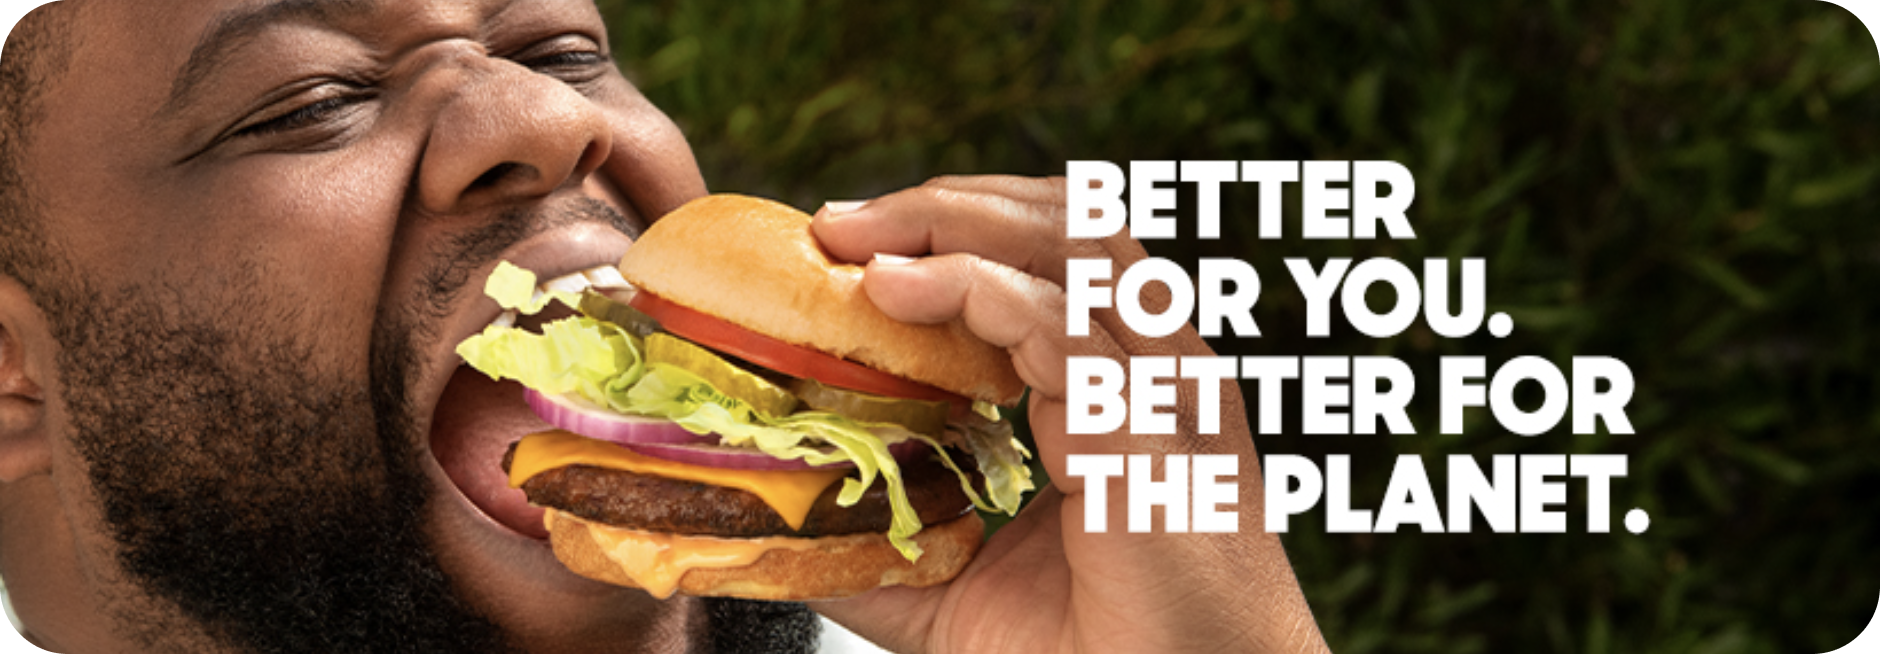 A Facebook image from Subway's campaign shows a man consuming a large Subway sandwich, and the picture caption says better for you, better for the planet.